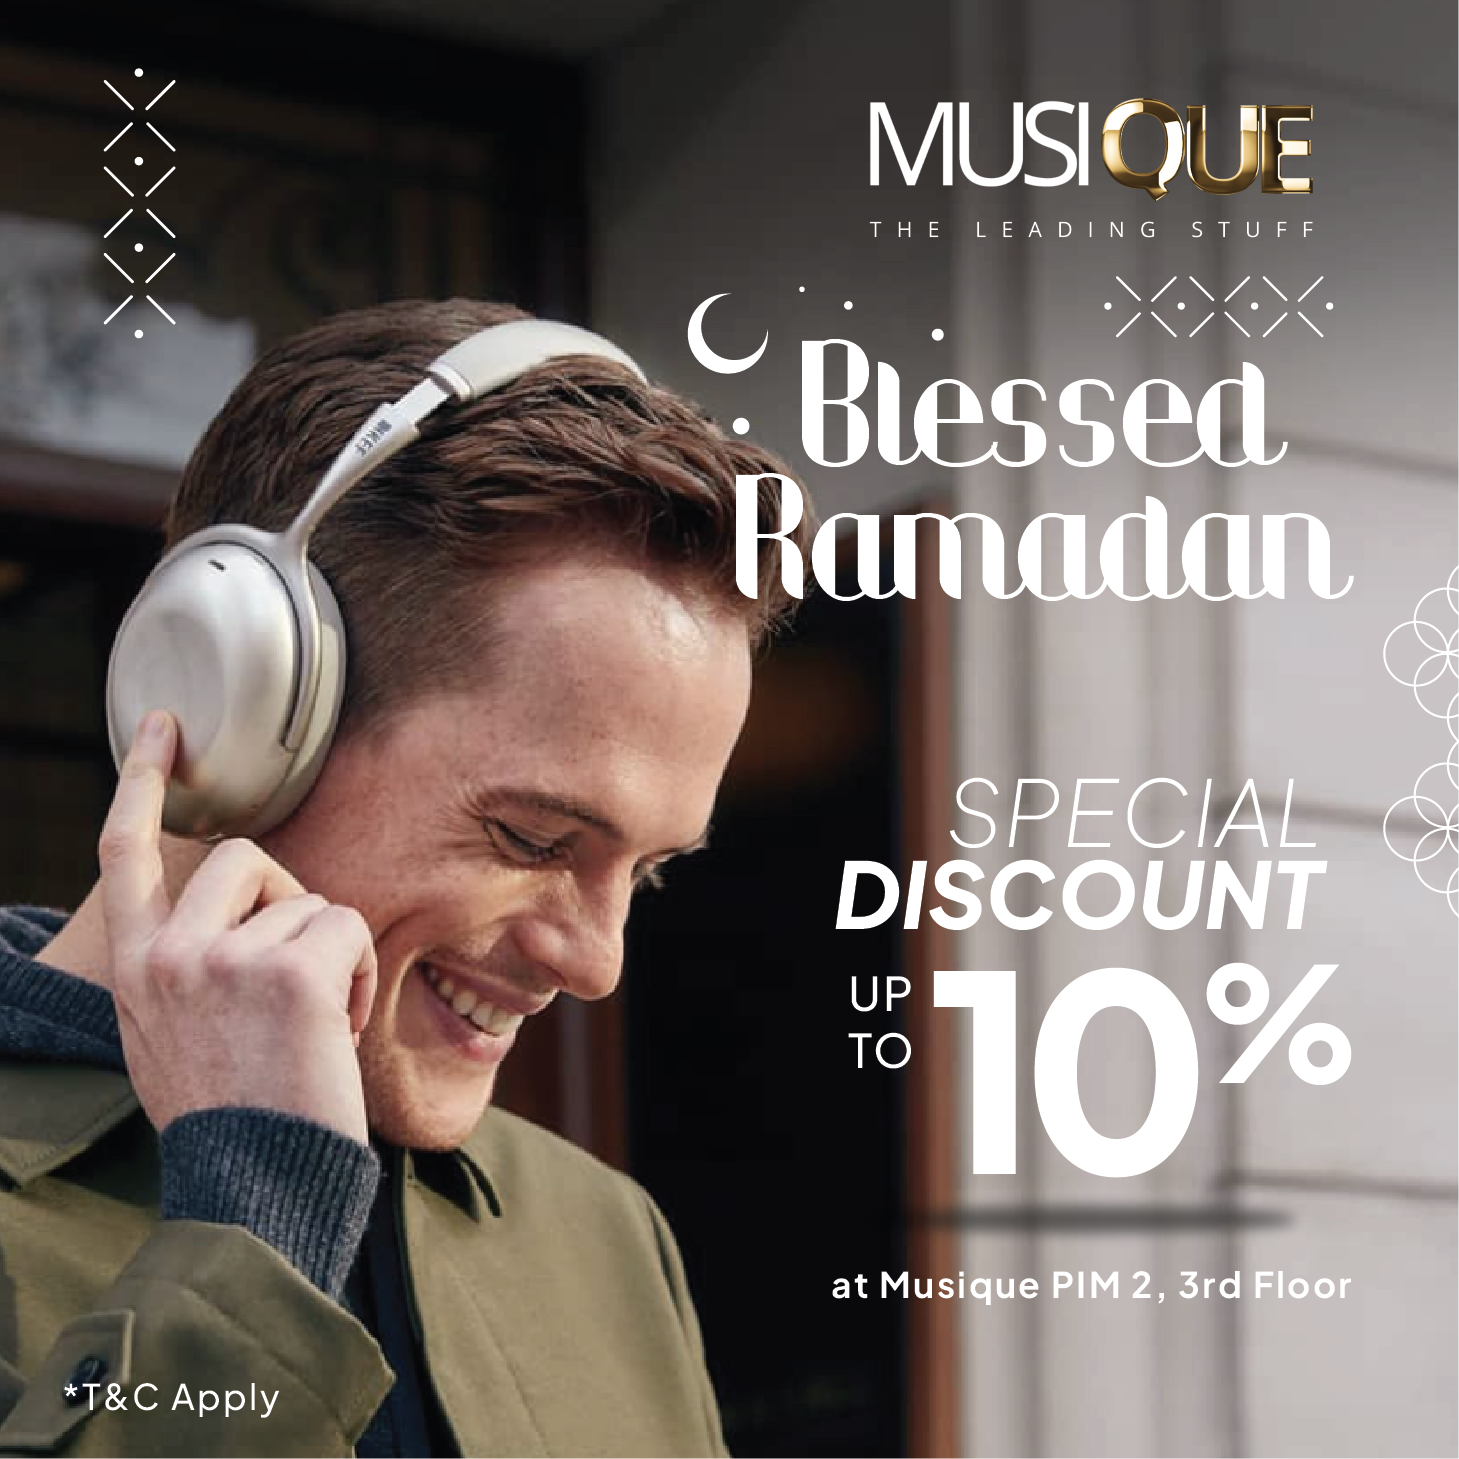 Musique PIM 2 Special Offer: Up to 10% Off! 